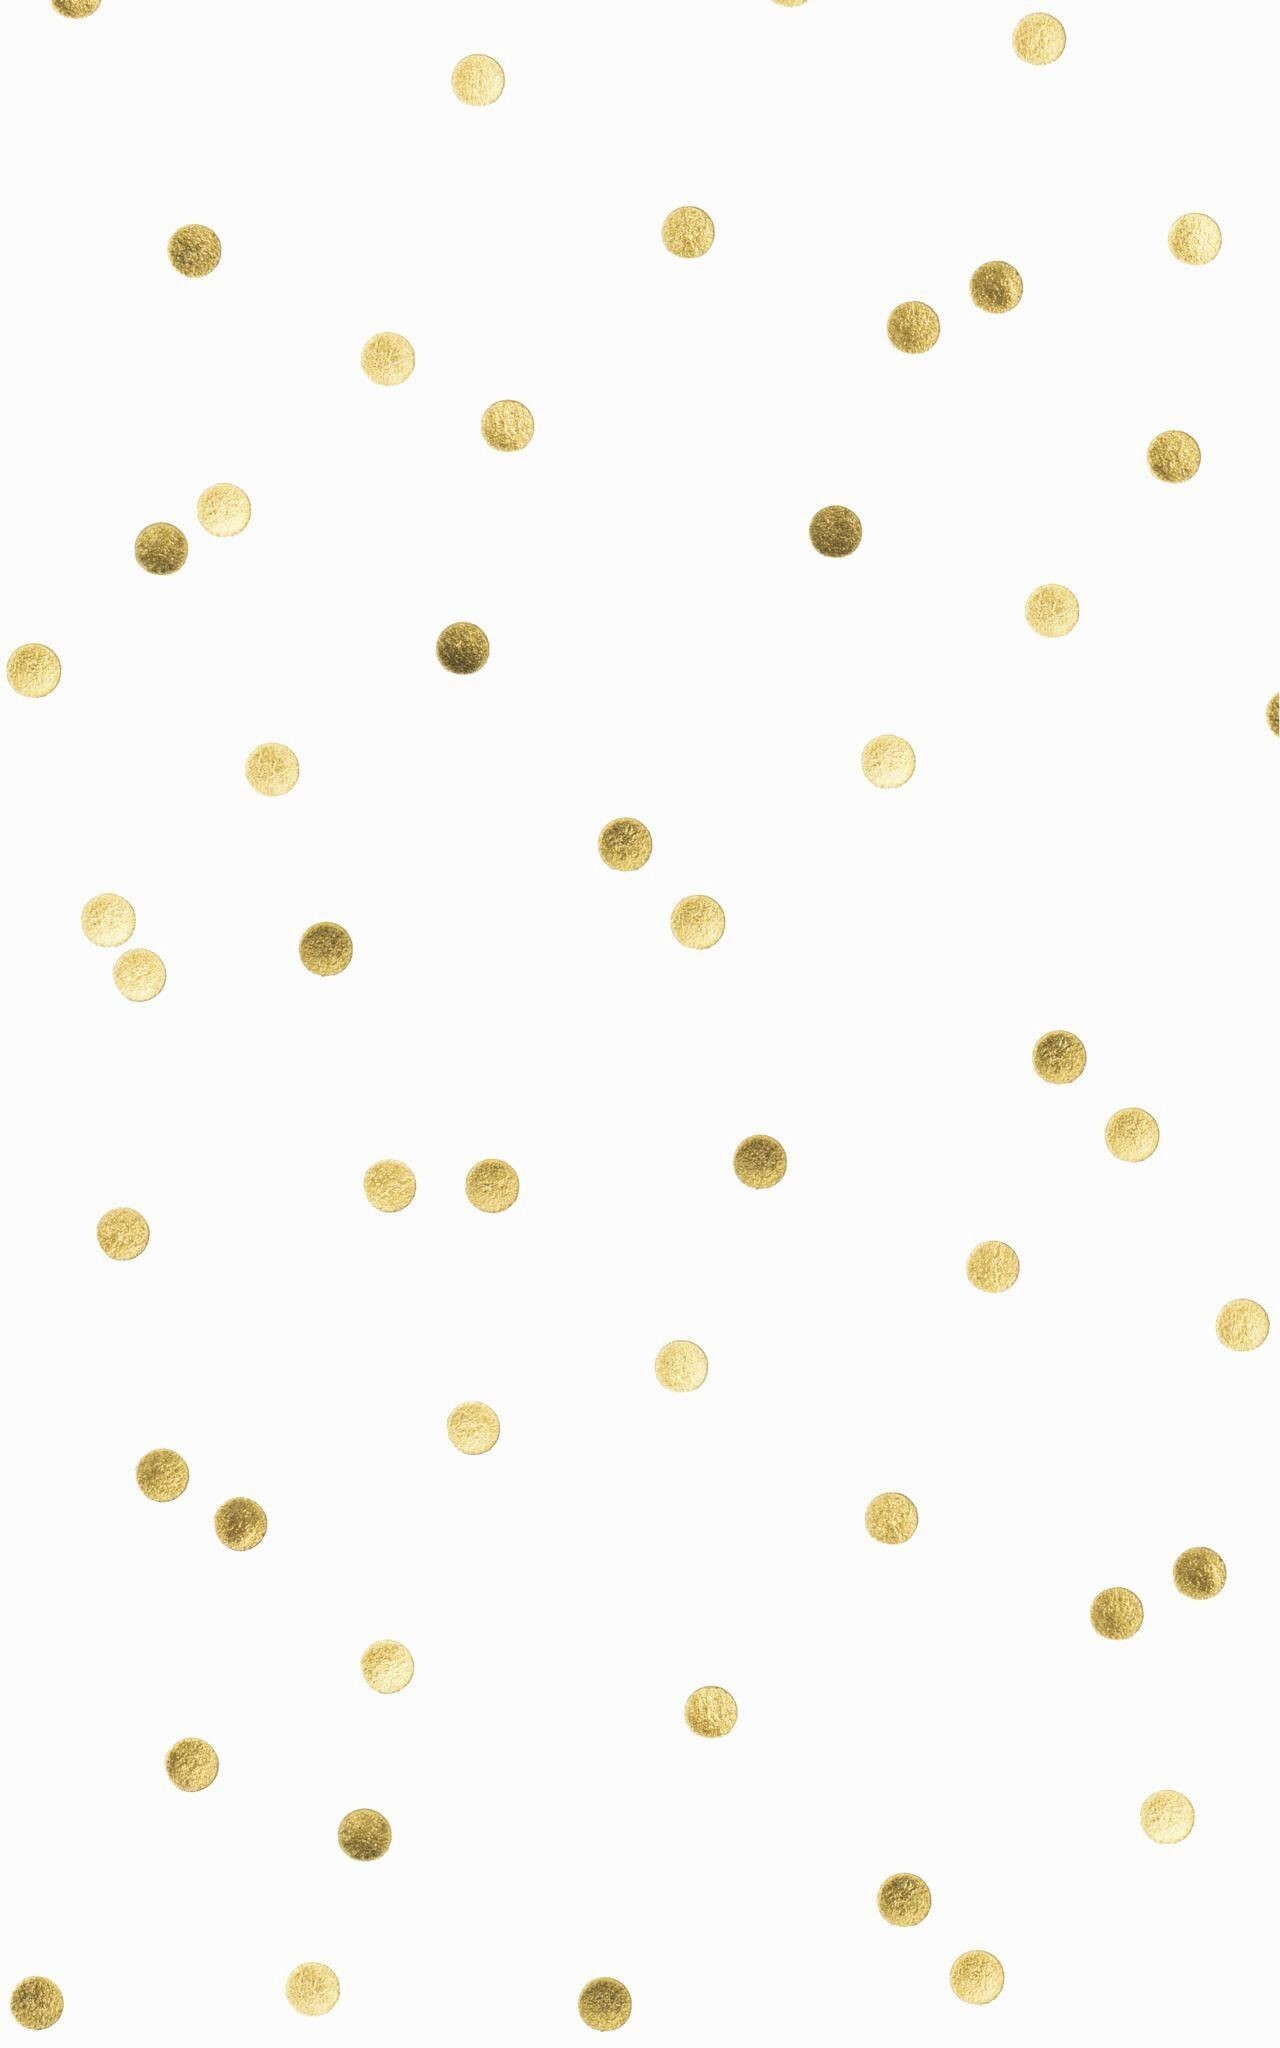 Gold Dots: Gold spots, Gold foil confetti, A spatter of decorative and cheerful dots. 1280x2050 HD Background.